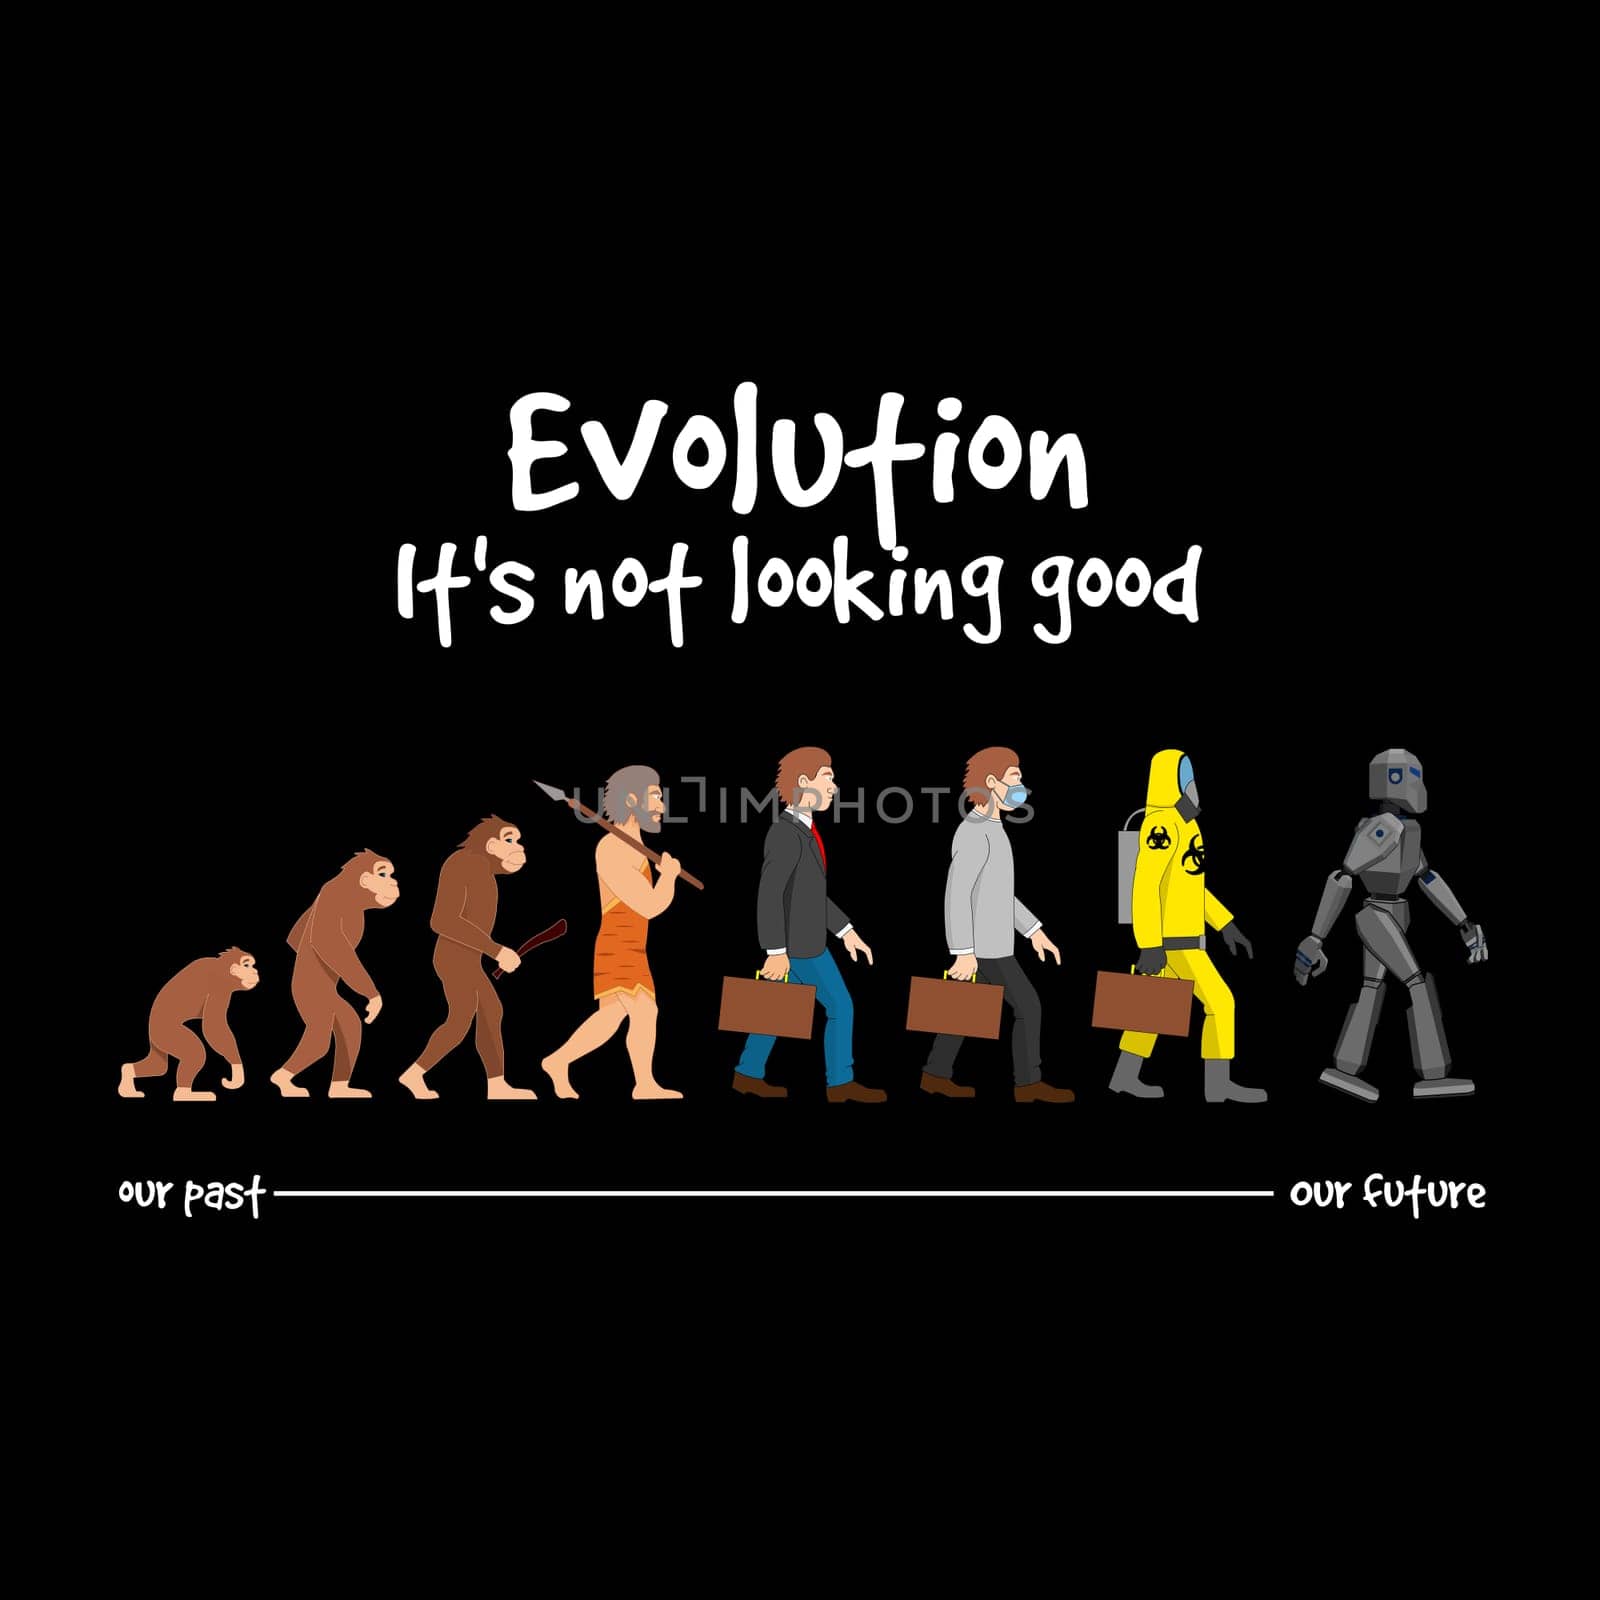 Evolution - it's not looking good by Bigalbaloo